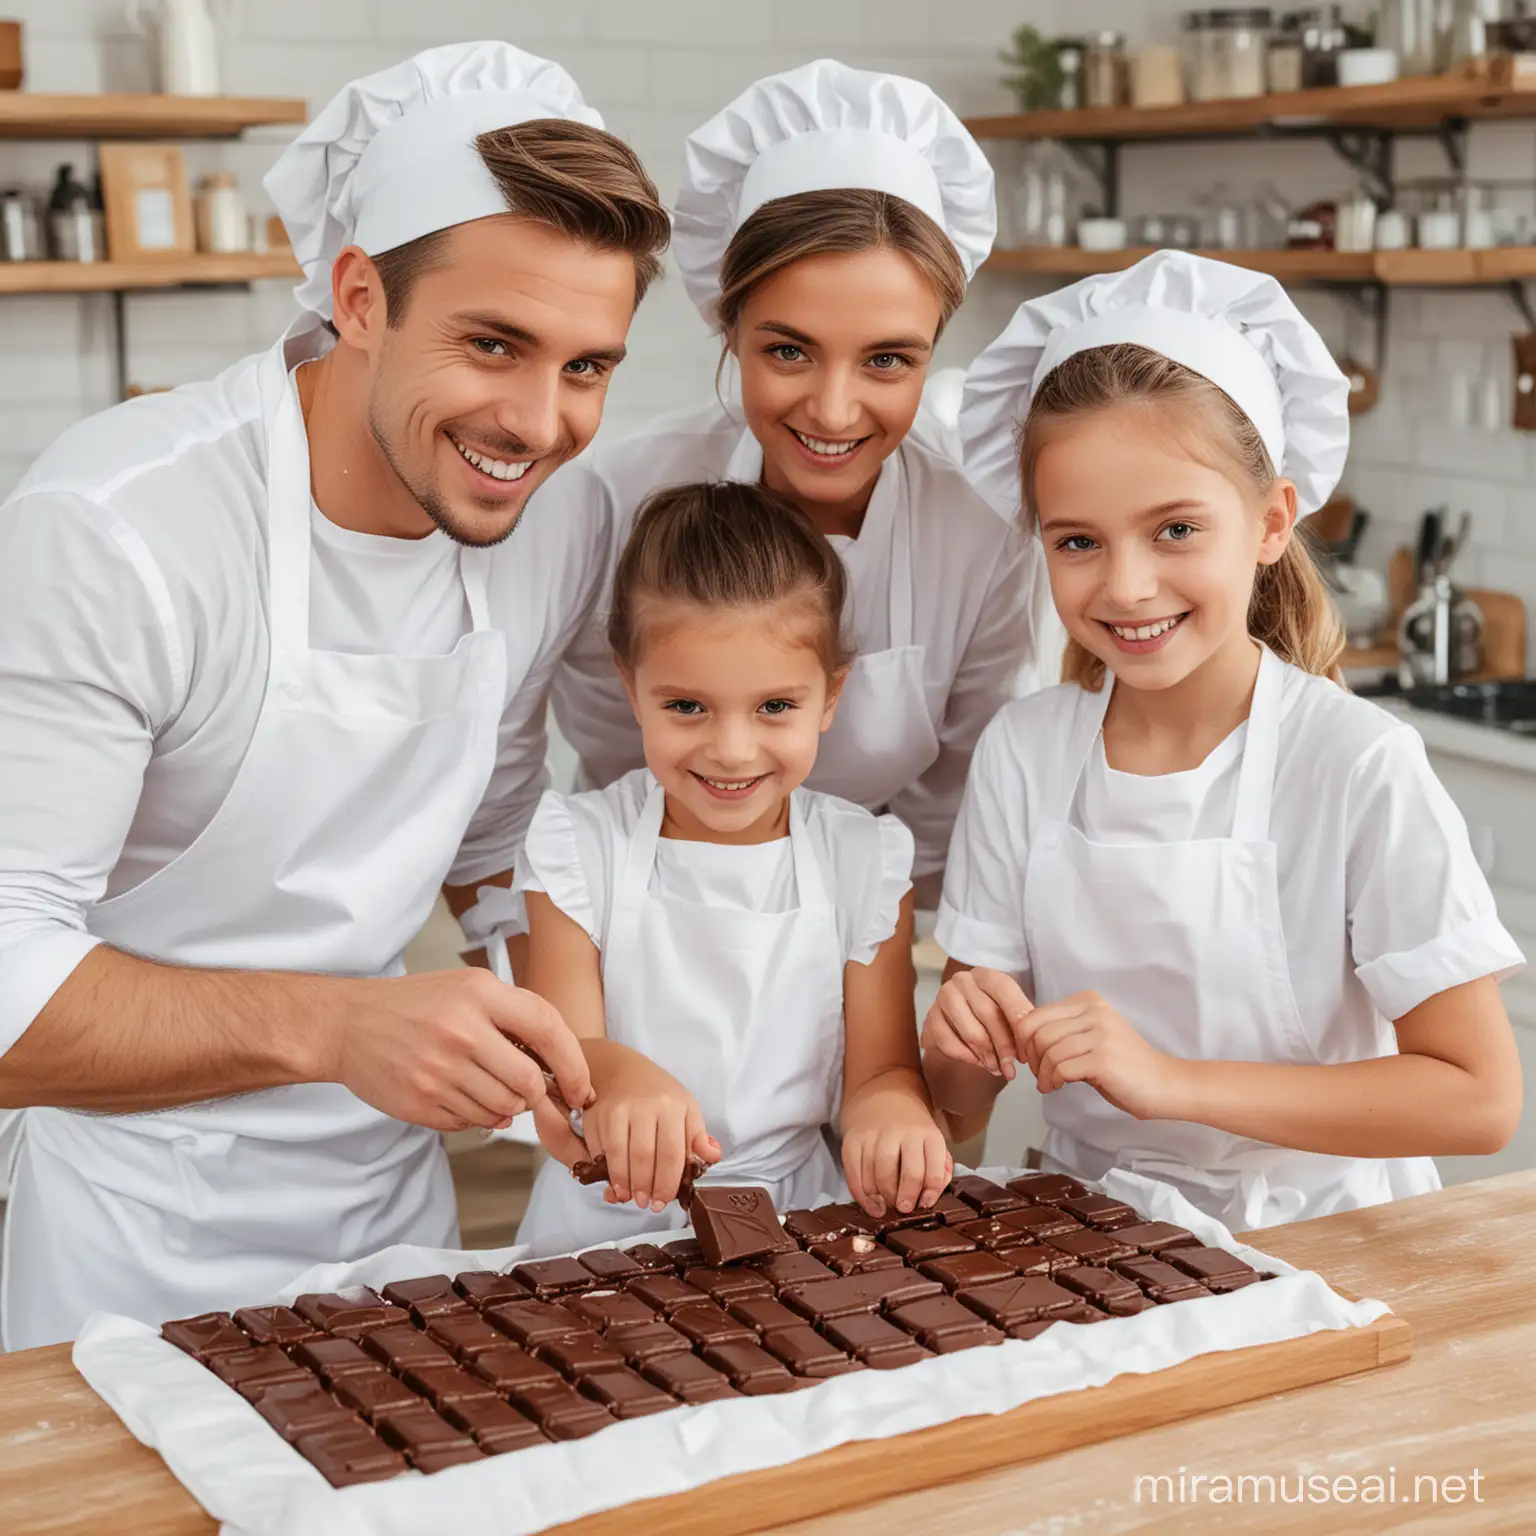 Family Fun Decorating Chocolate Bars with Parents and Kids